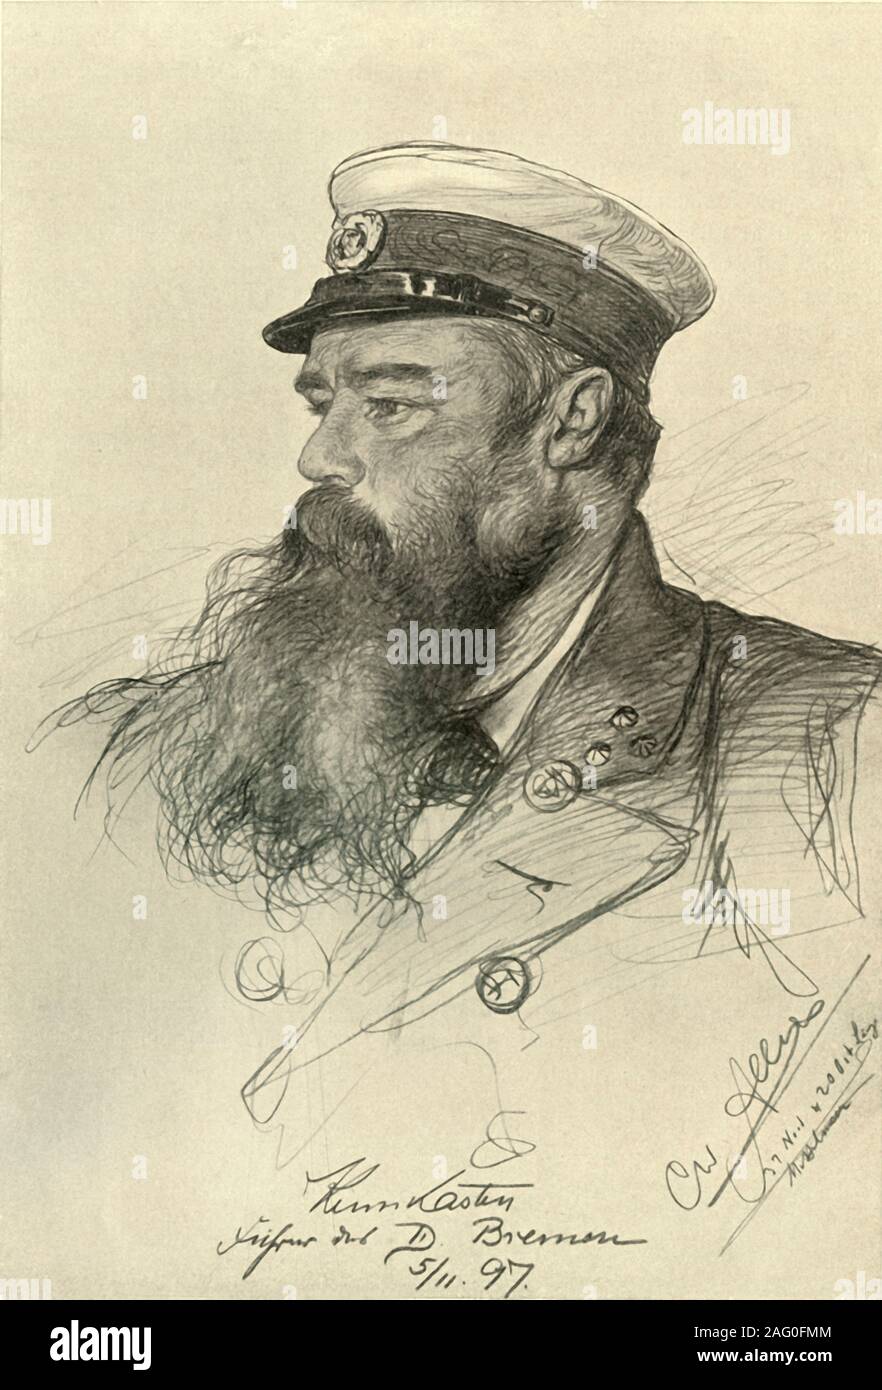 The captain of the 'Bremen', 1898. The SS Bremen was a ship of the  Norddeutscher Lloyd (North German Lloyd), a German shipping company. From  &quot;Rund um die Erde&quot; [Round the Earth], written